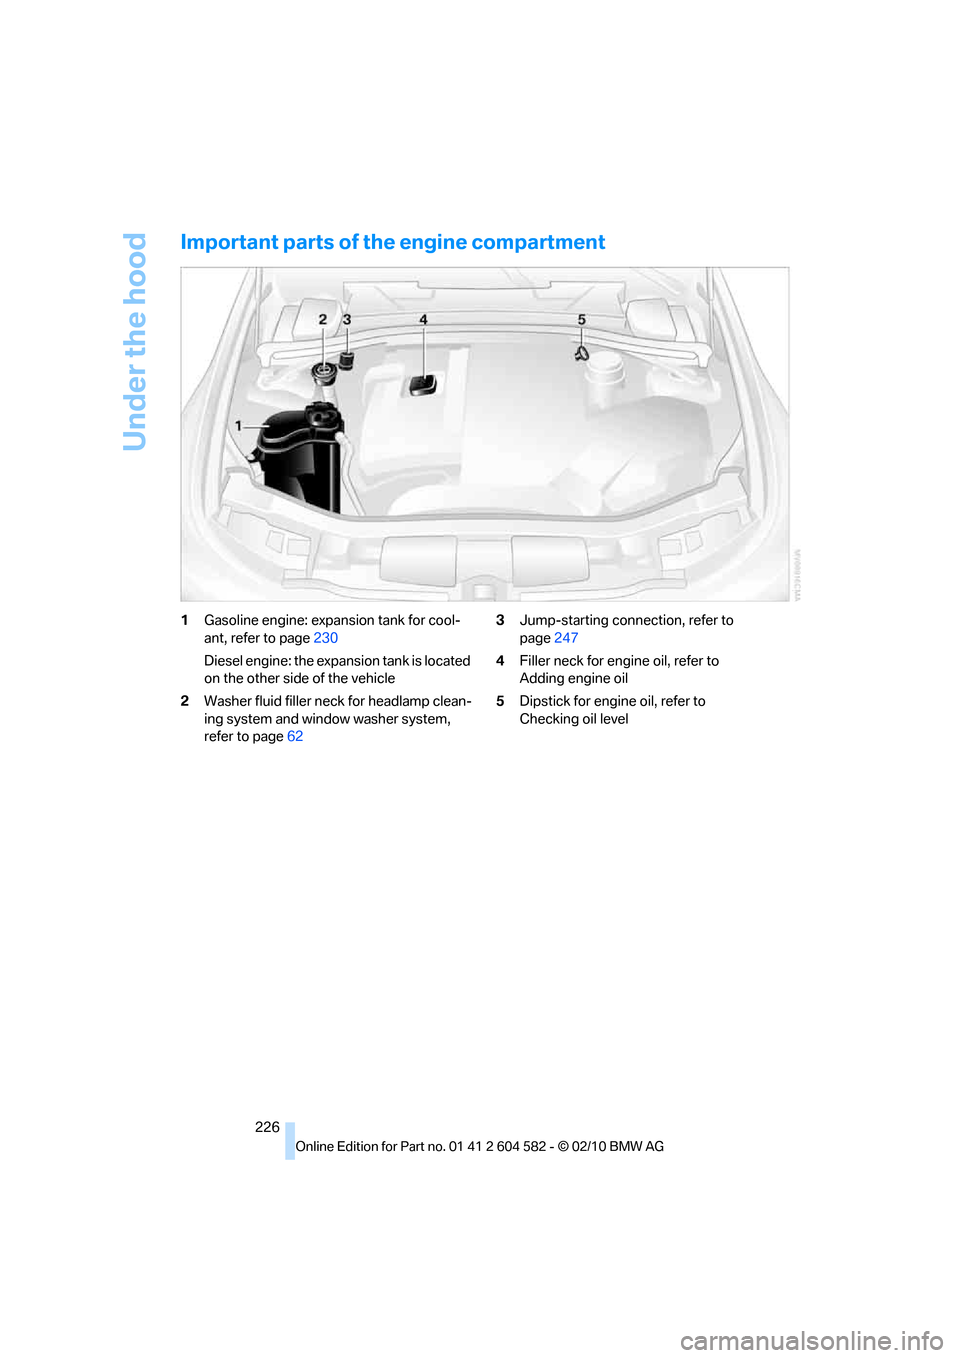 BMW 335I 2011 E90 Owners Manual Under the hood
226
Important parts of the engine compartment
1Gasoline engine: expansion tank for cool-
ant, refer to page230
Diesel engine: the expansion tank is located 
on the other side of the veh